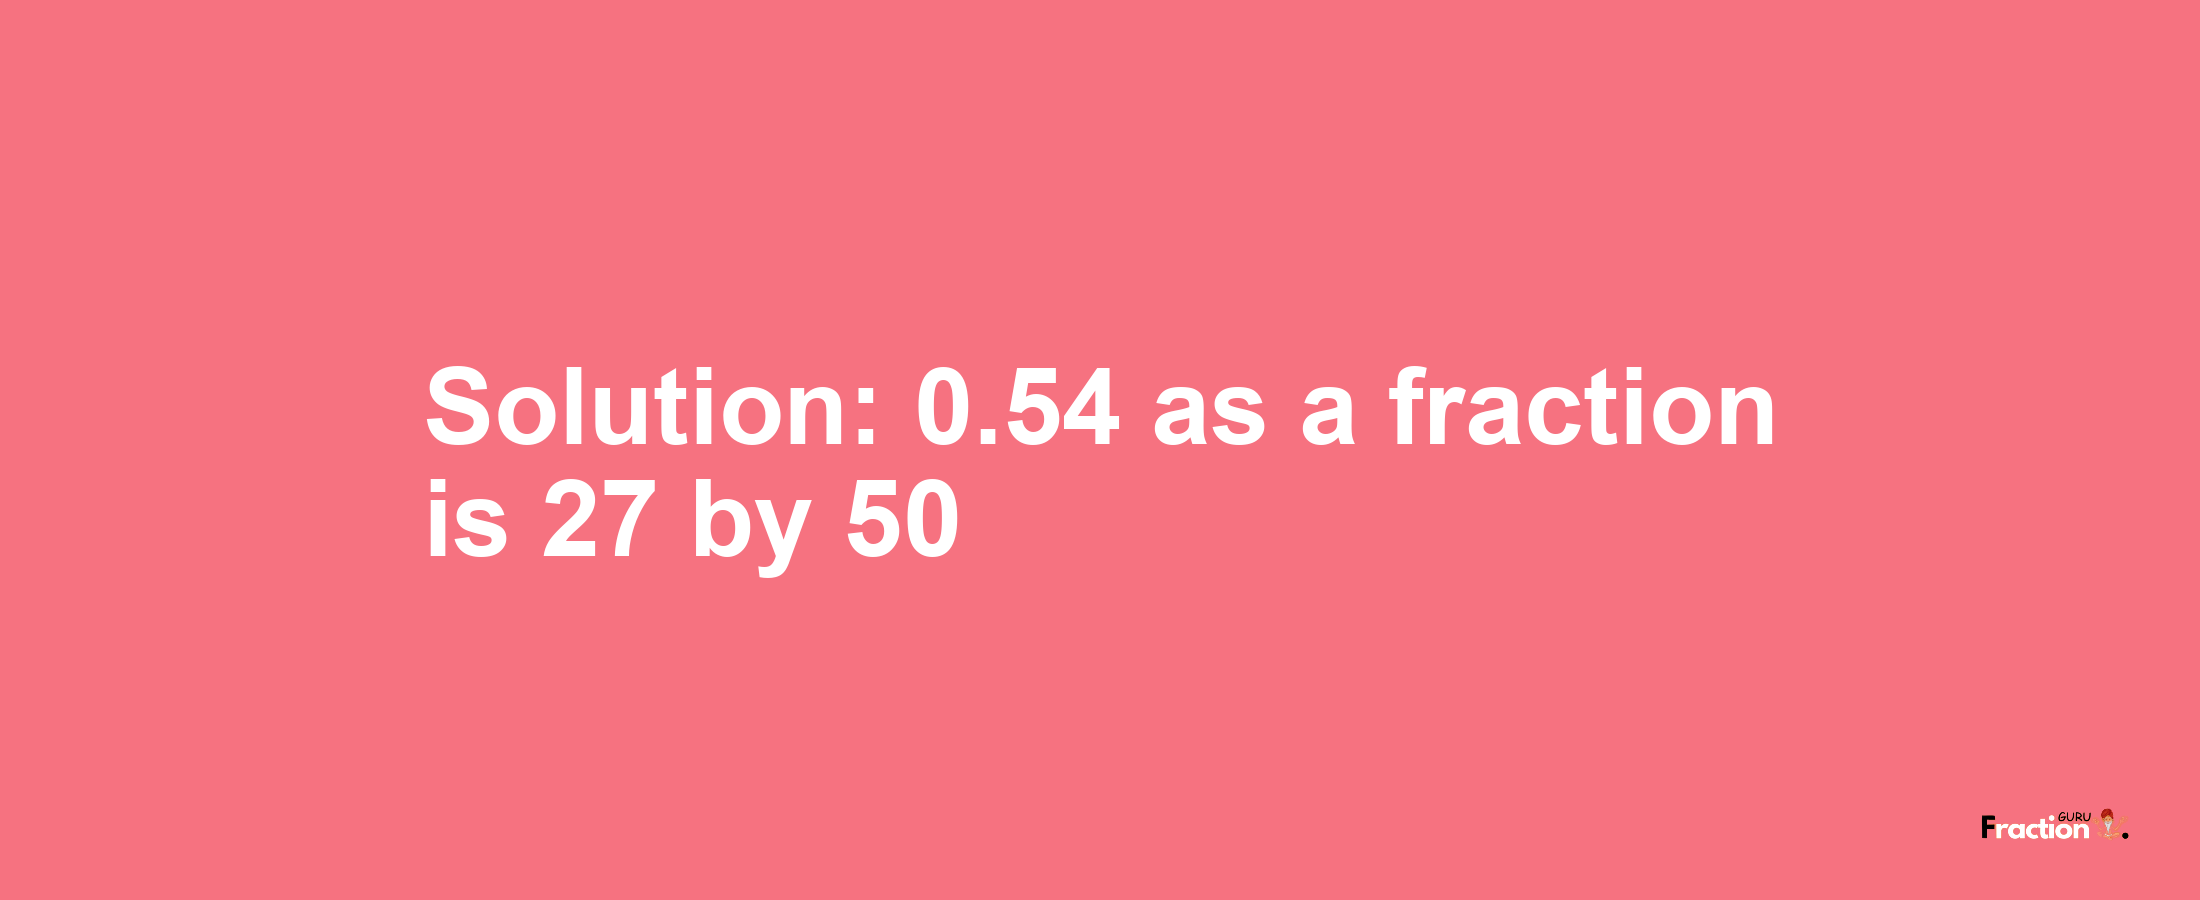 Solution:0.54 as a fraction is 27/50